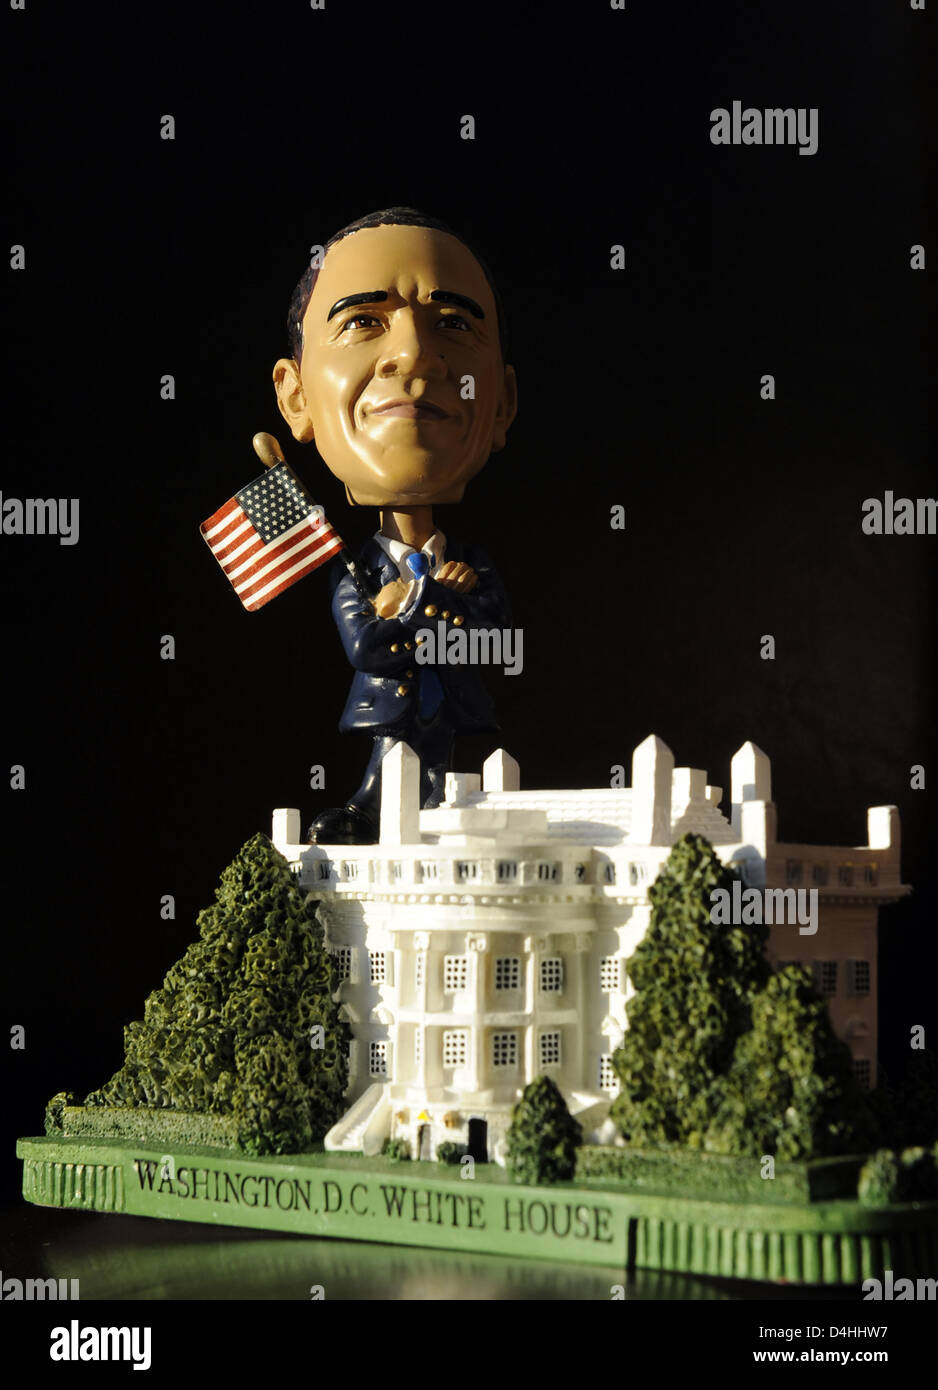 A figure of US President-elect Barack Obama with a US flag stands on a model of the White House in Berlin, Germany, 13 January 2009. Obama will be inaugurated as the 44th US President on 20 January in Washington D.C., USA. Obama will be the first African-American President and is a popular figure for merchandise. Photo: RAINER JENSEN Stock Photo